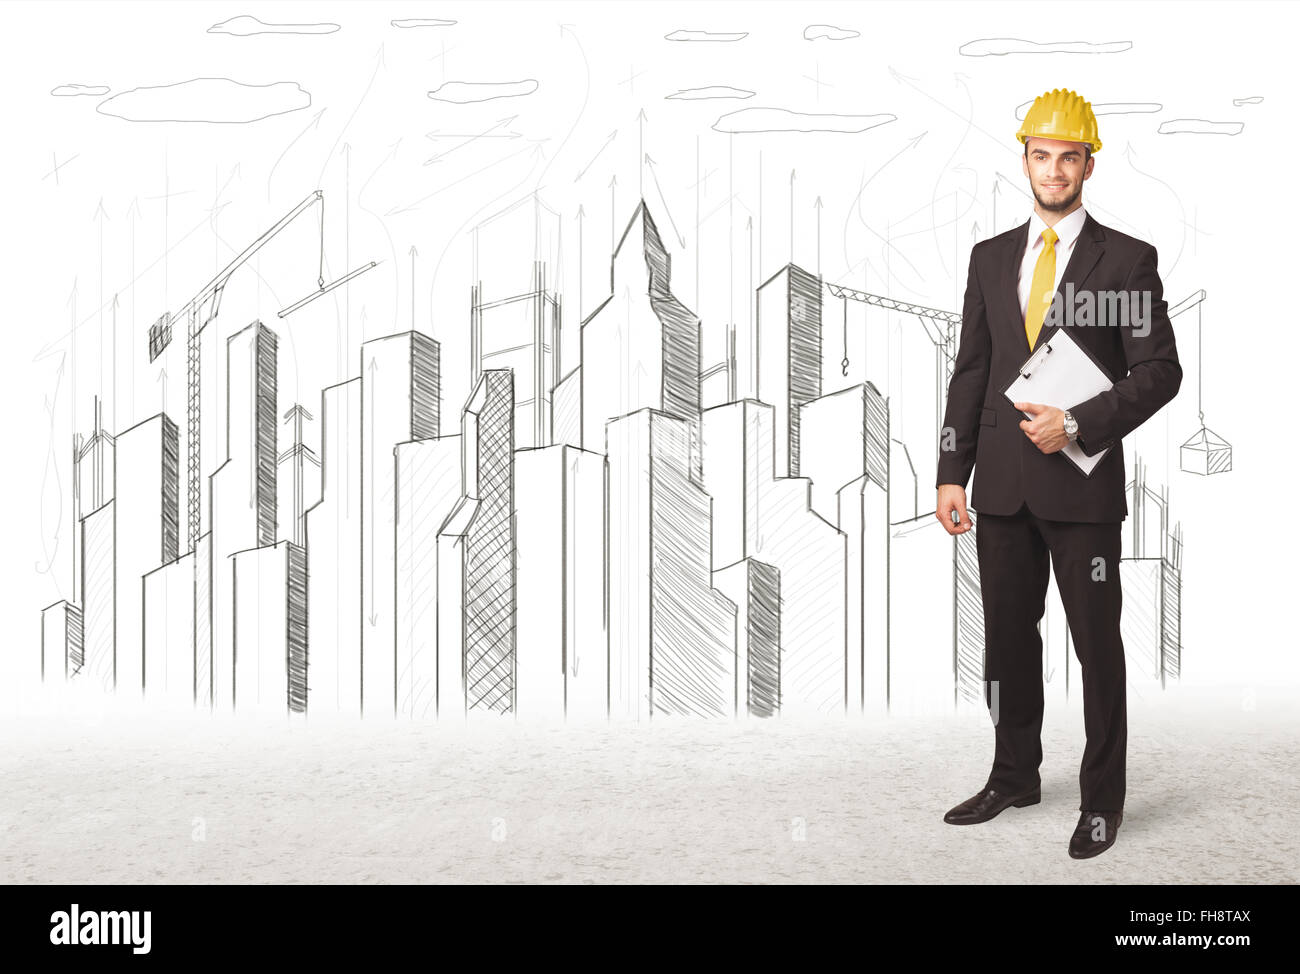 Engineer man with building city drawing in background Stock Photo